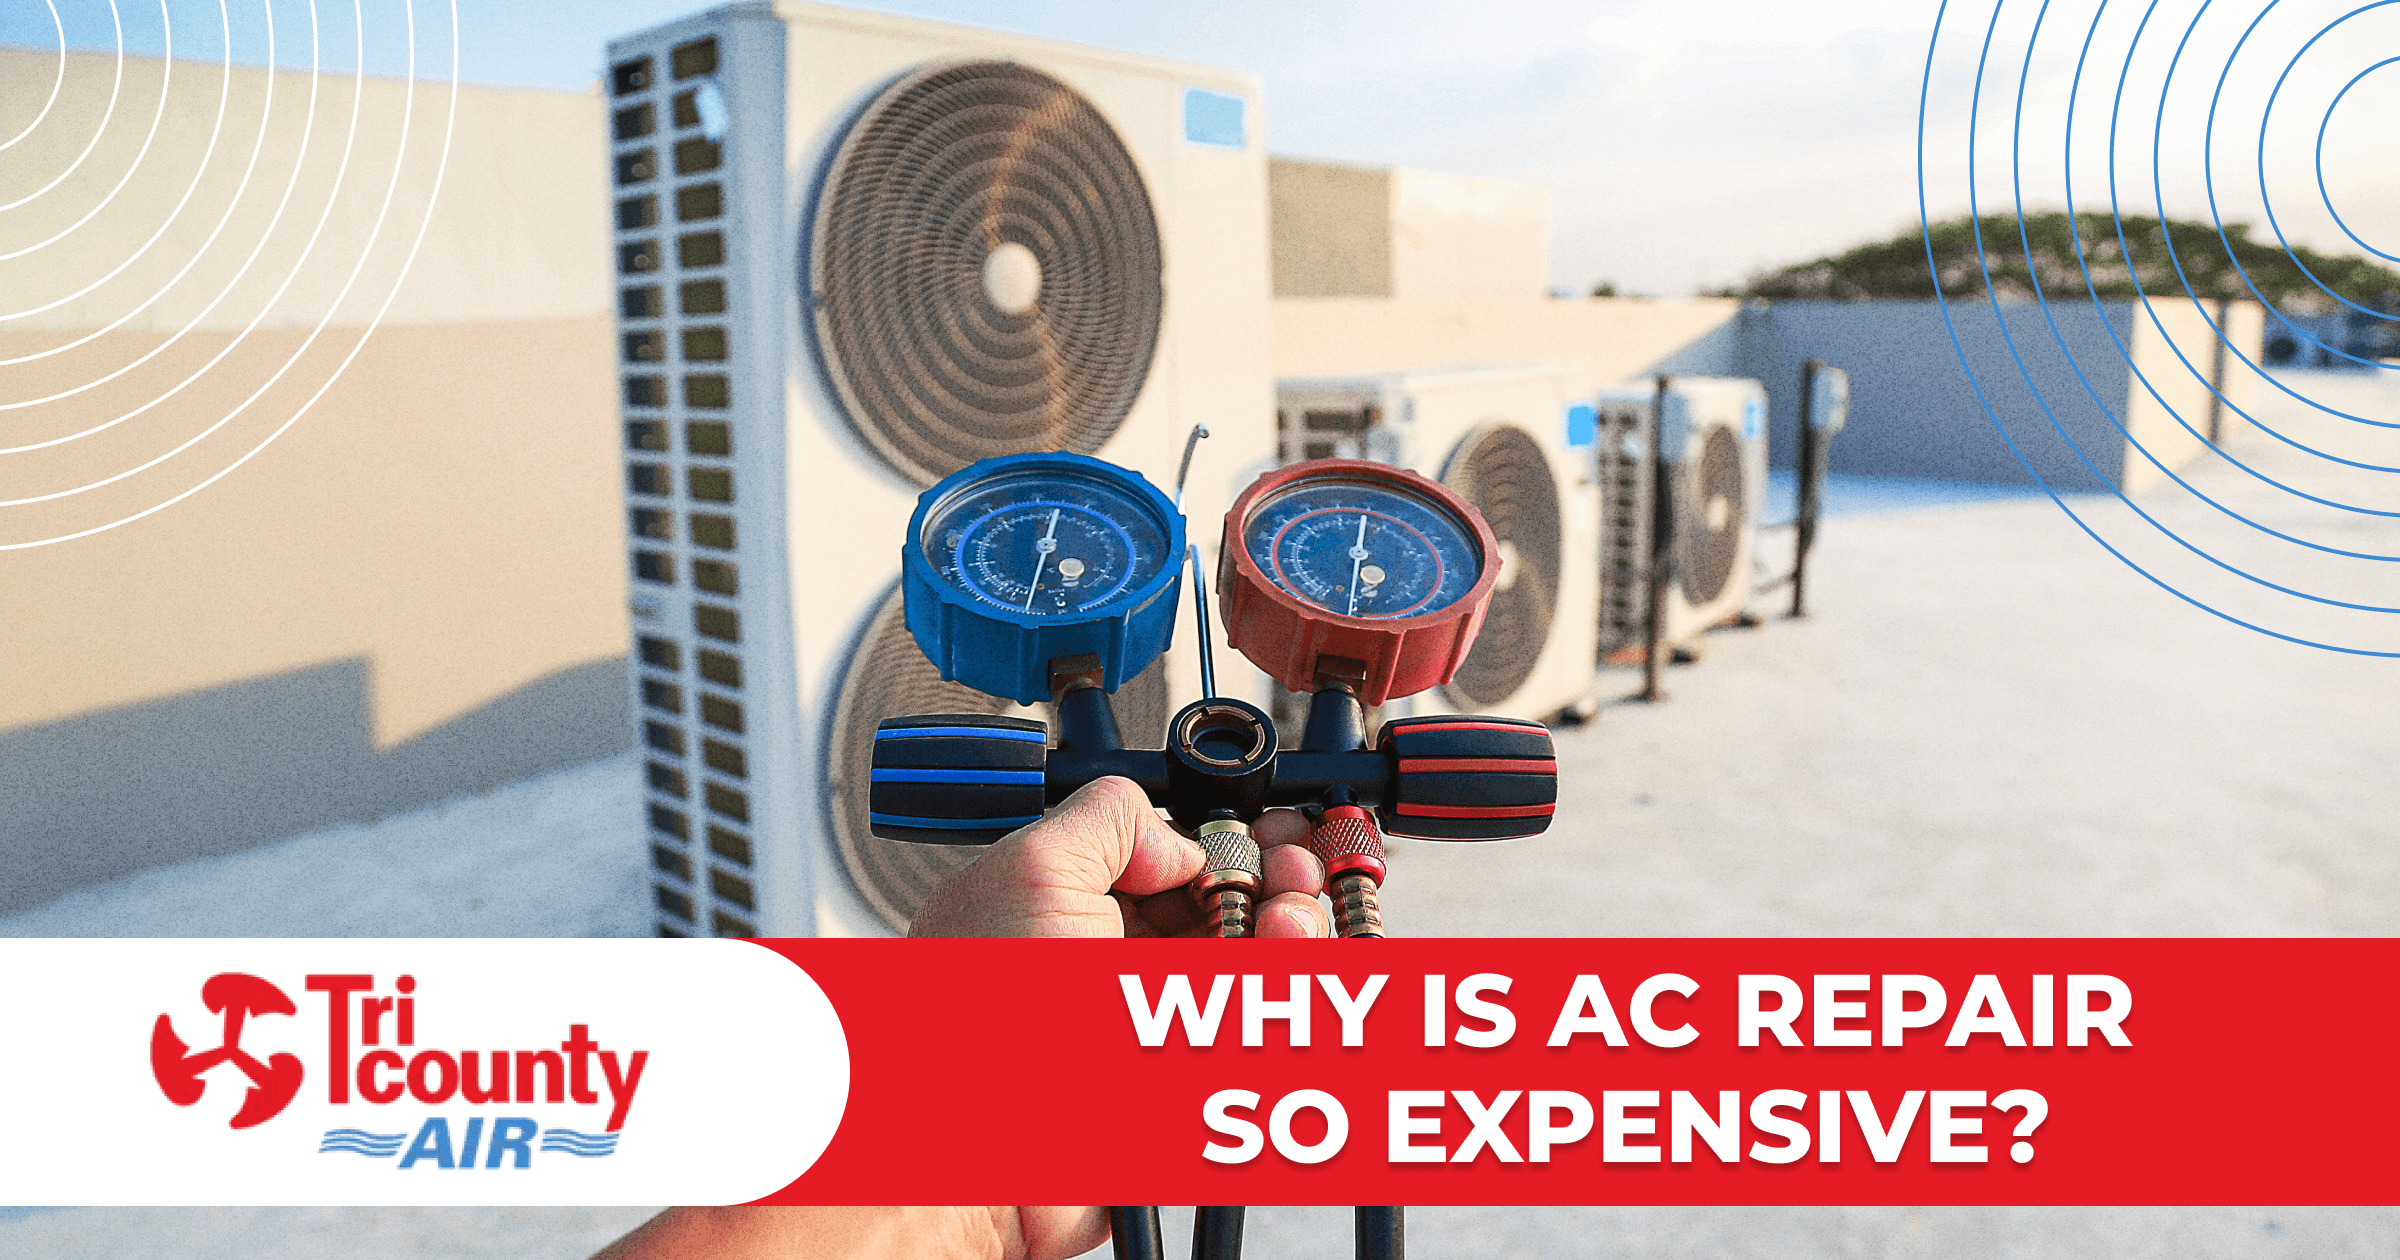 Why Is AC Repair So Expensive?